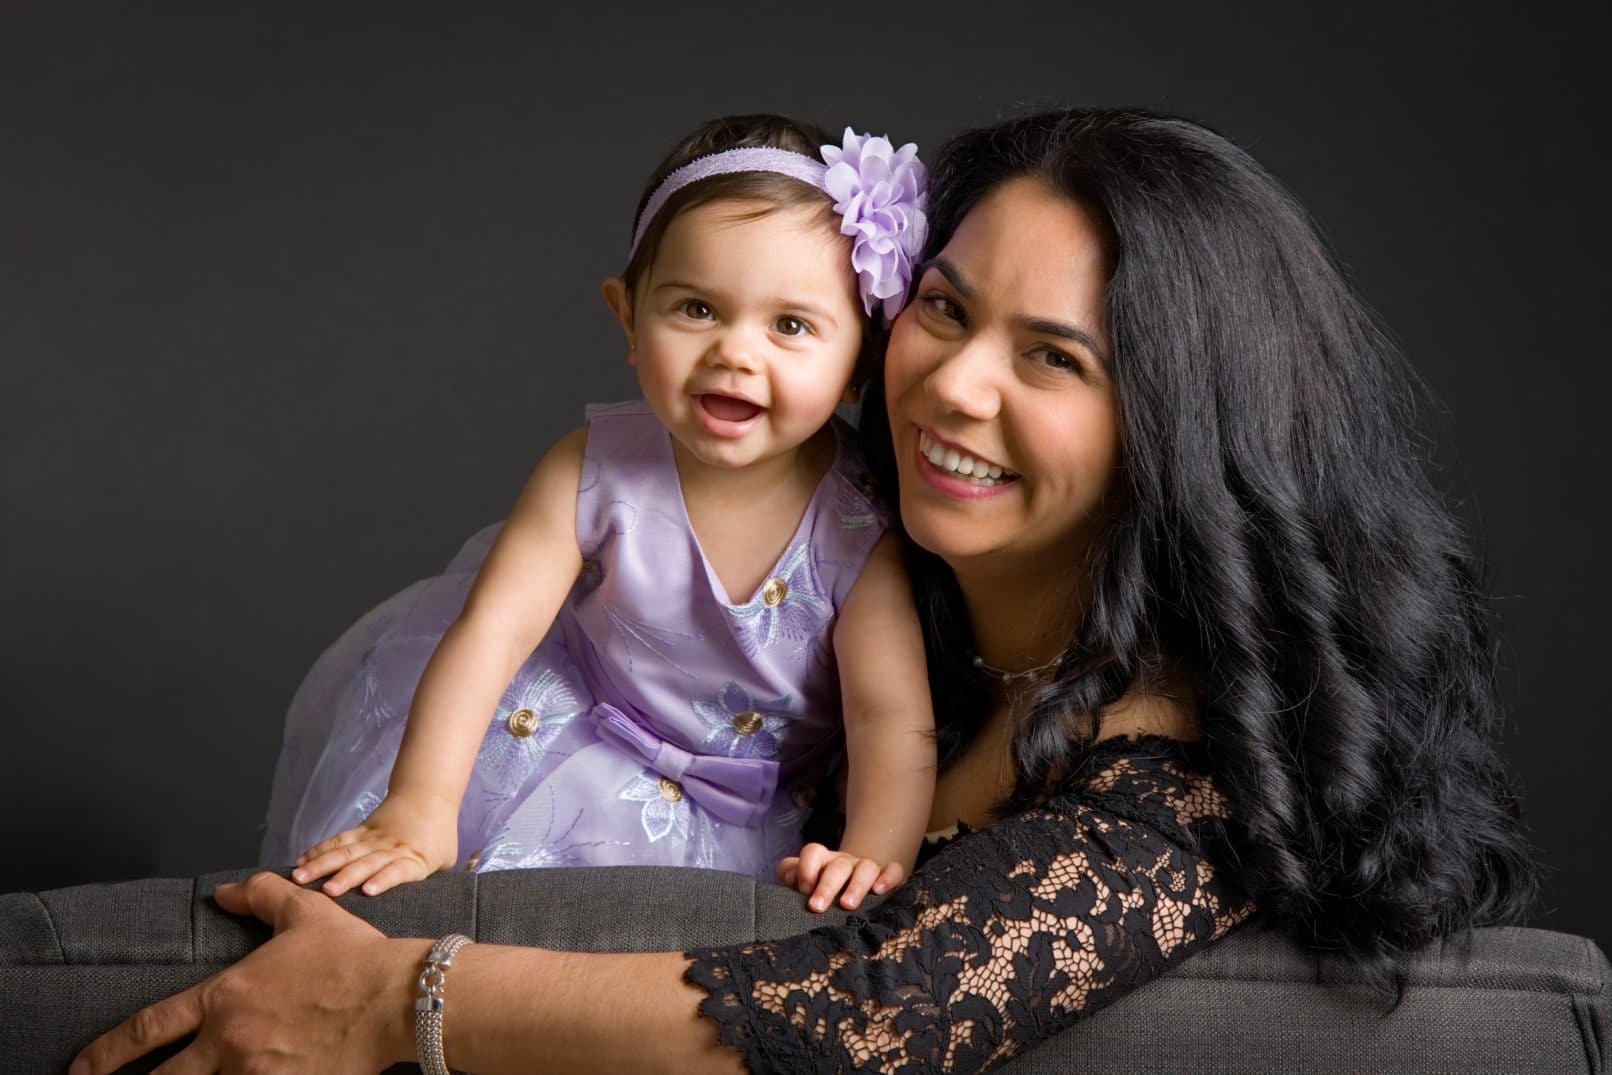 Mother Daughter portrait from Lara Grauer Photography